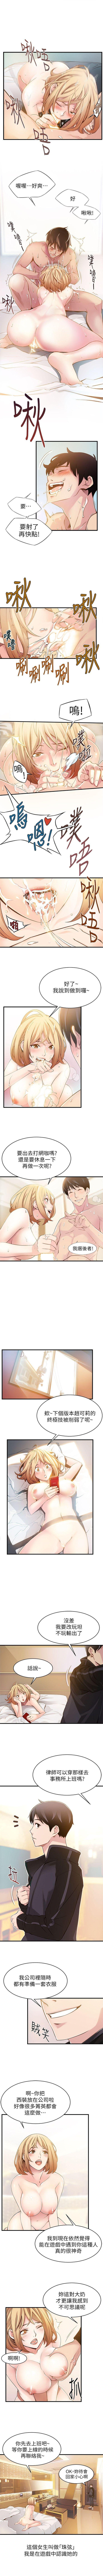 Wanking 弱點 1-101 官方中文（連載中） Chastity - Page 3